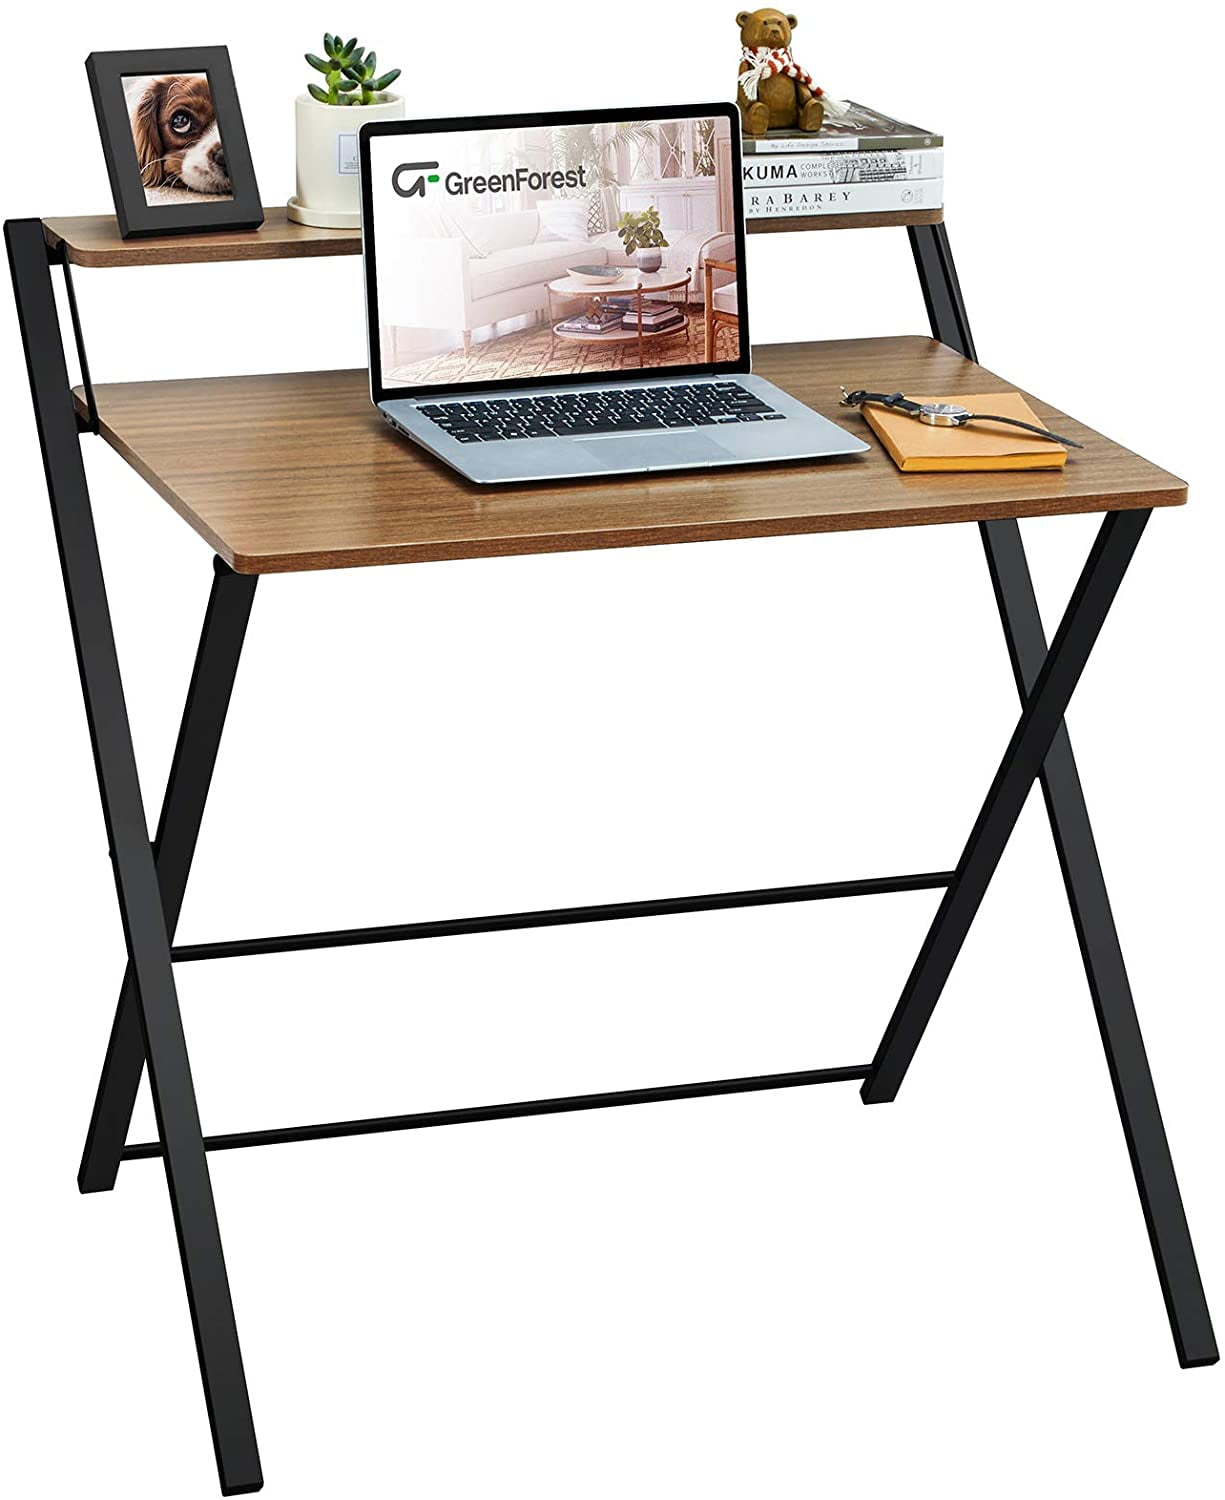 Espresso GreenForest Folding Desk and Coffee Table 2-Tier No Assembly Required Foldable Table Industrial Open Shelf Coffee Table with Metal Frame Brown